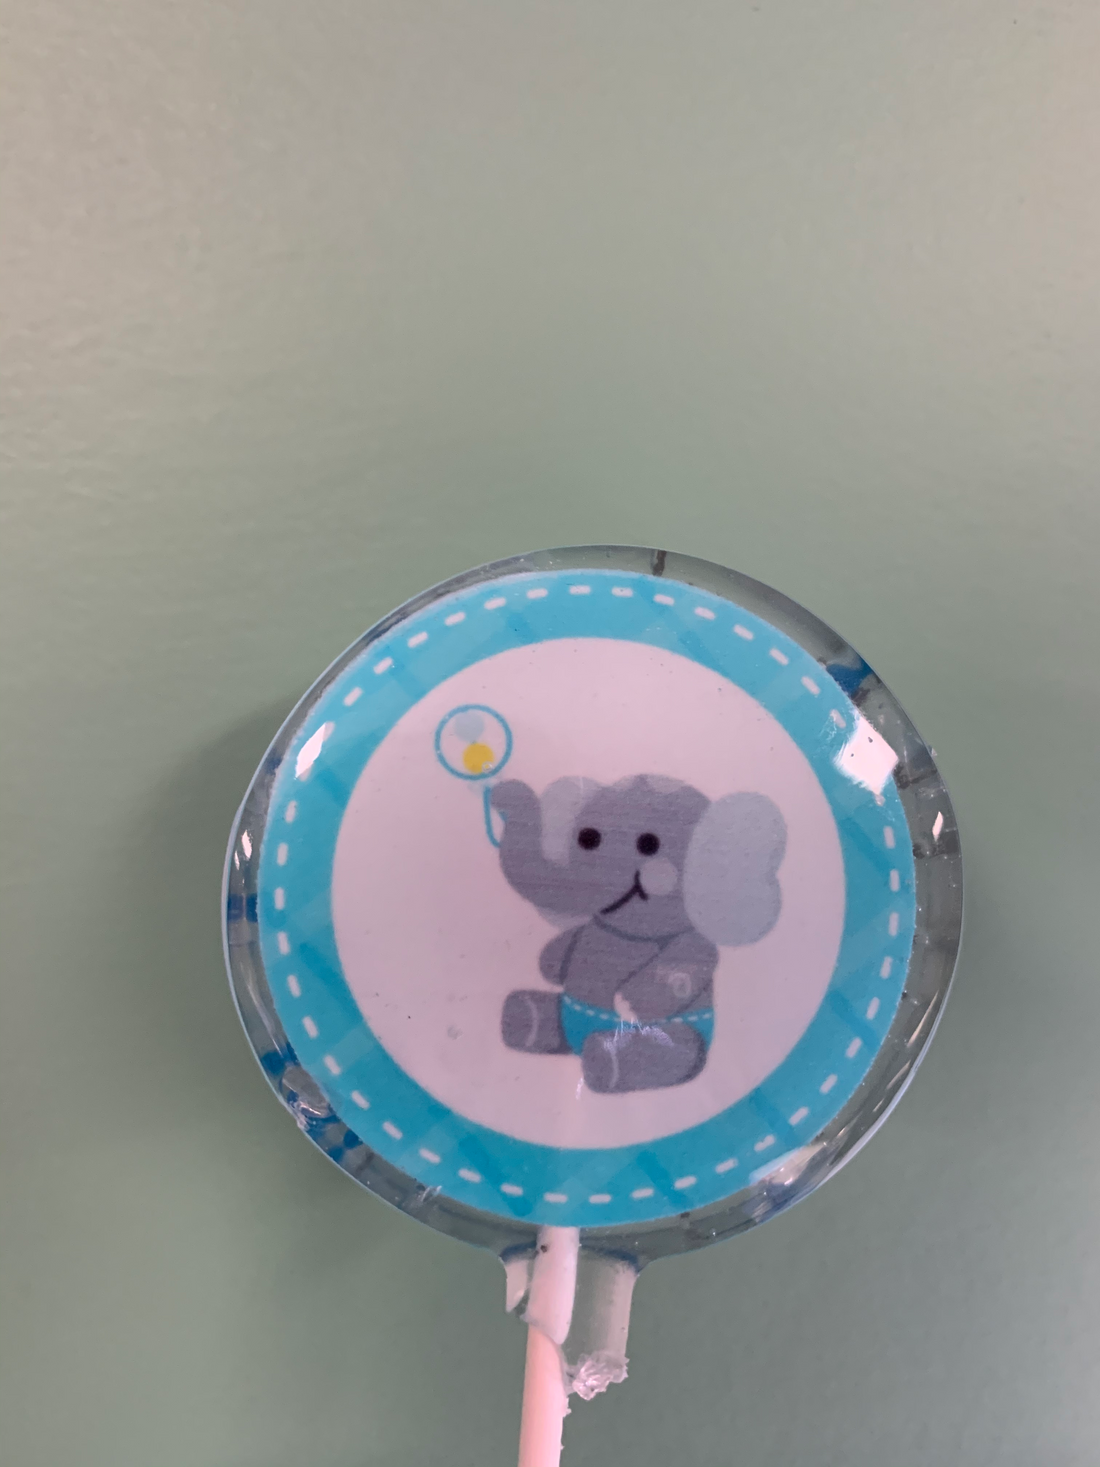 Baby Boy Lollipops with your graphic-Candy-[Kosher Mints]-[Kosher Custom Candy]-Candy A Plenty